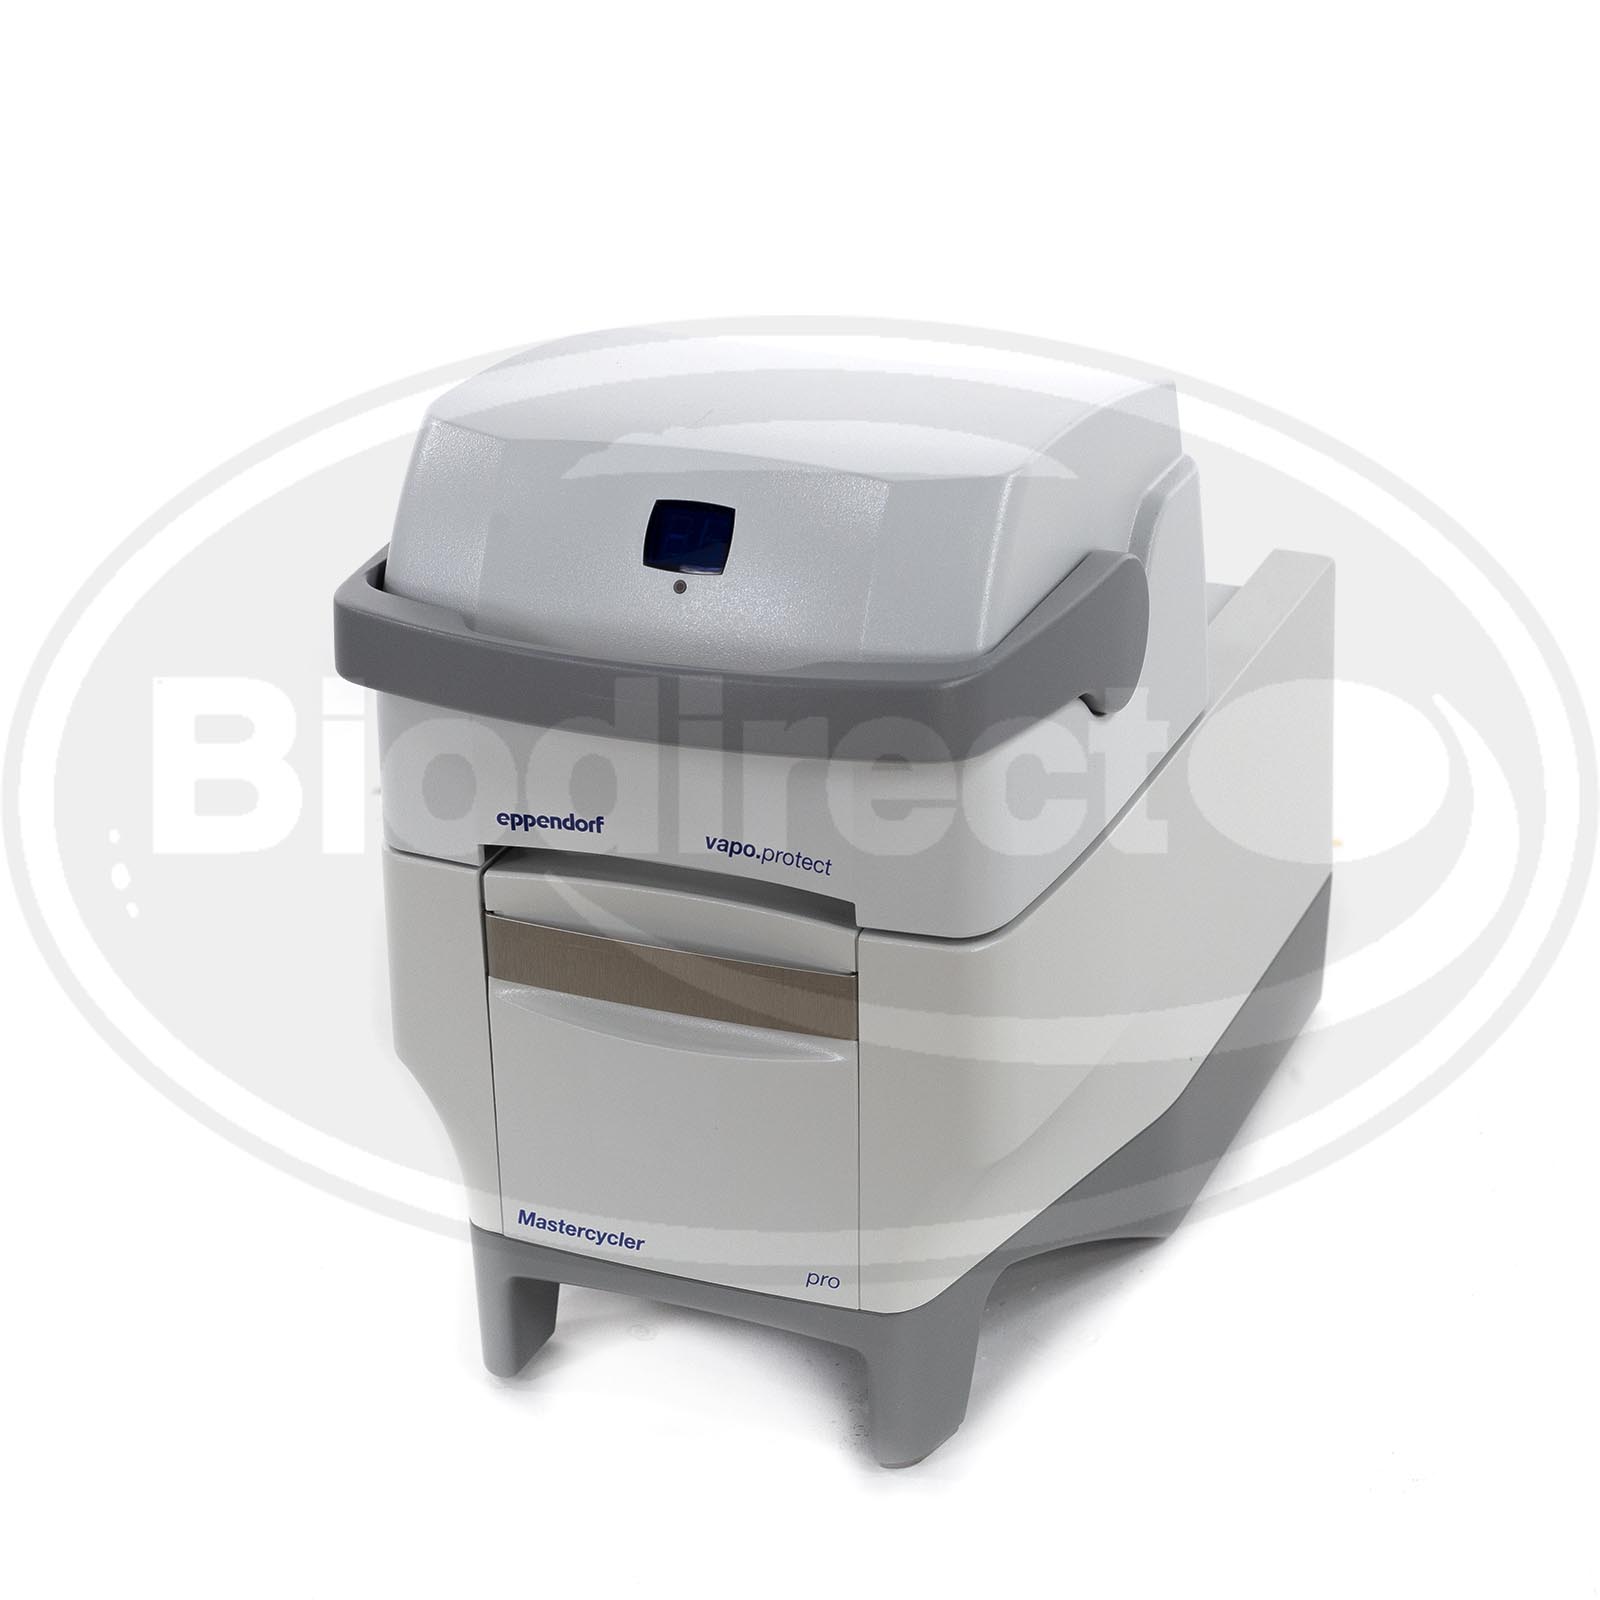 Eppendorf Thermal Cycler Mastercycler Pro Vapo Protect